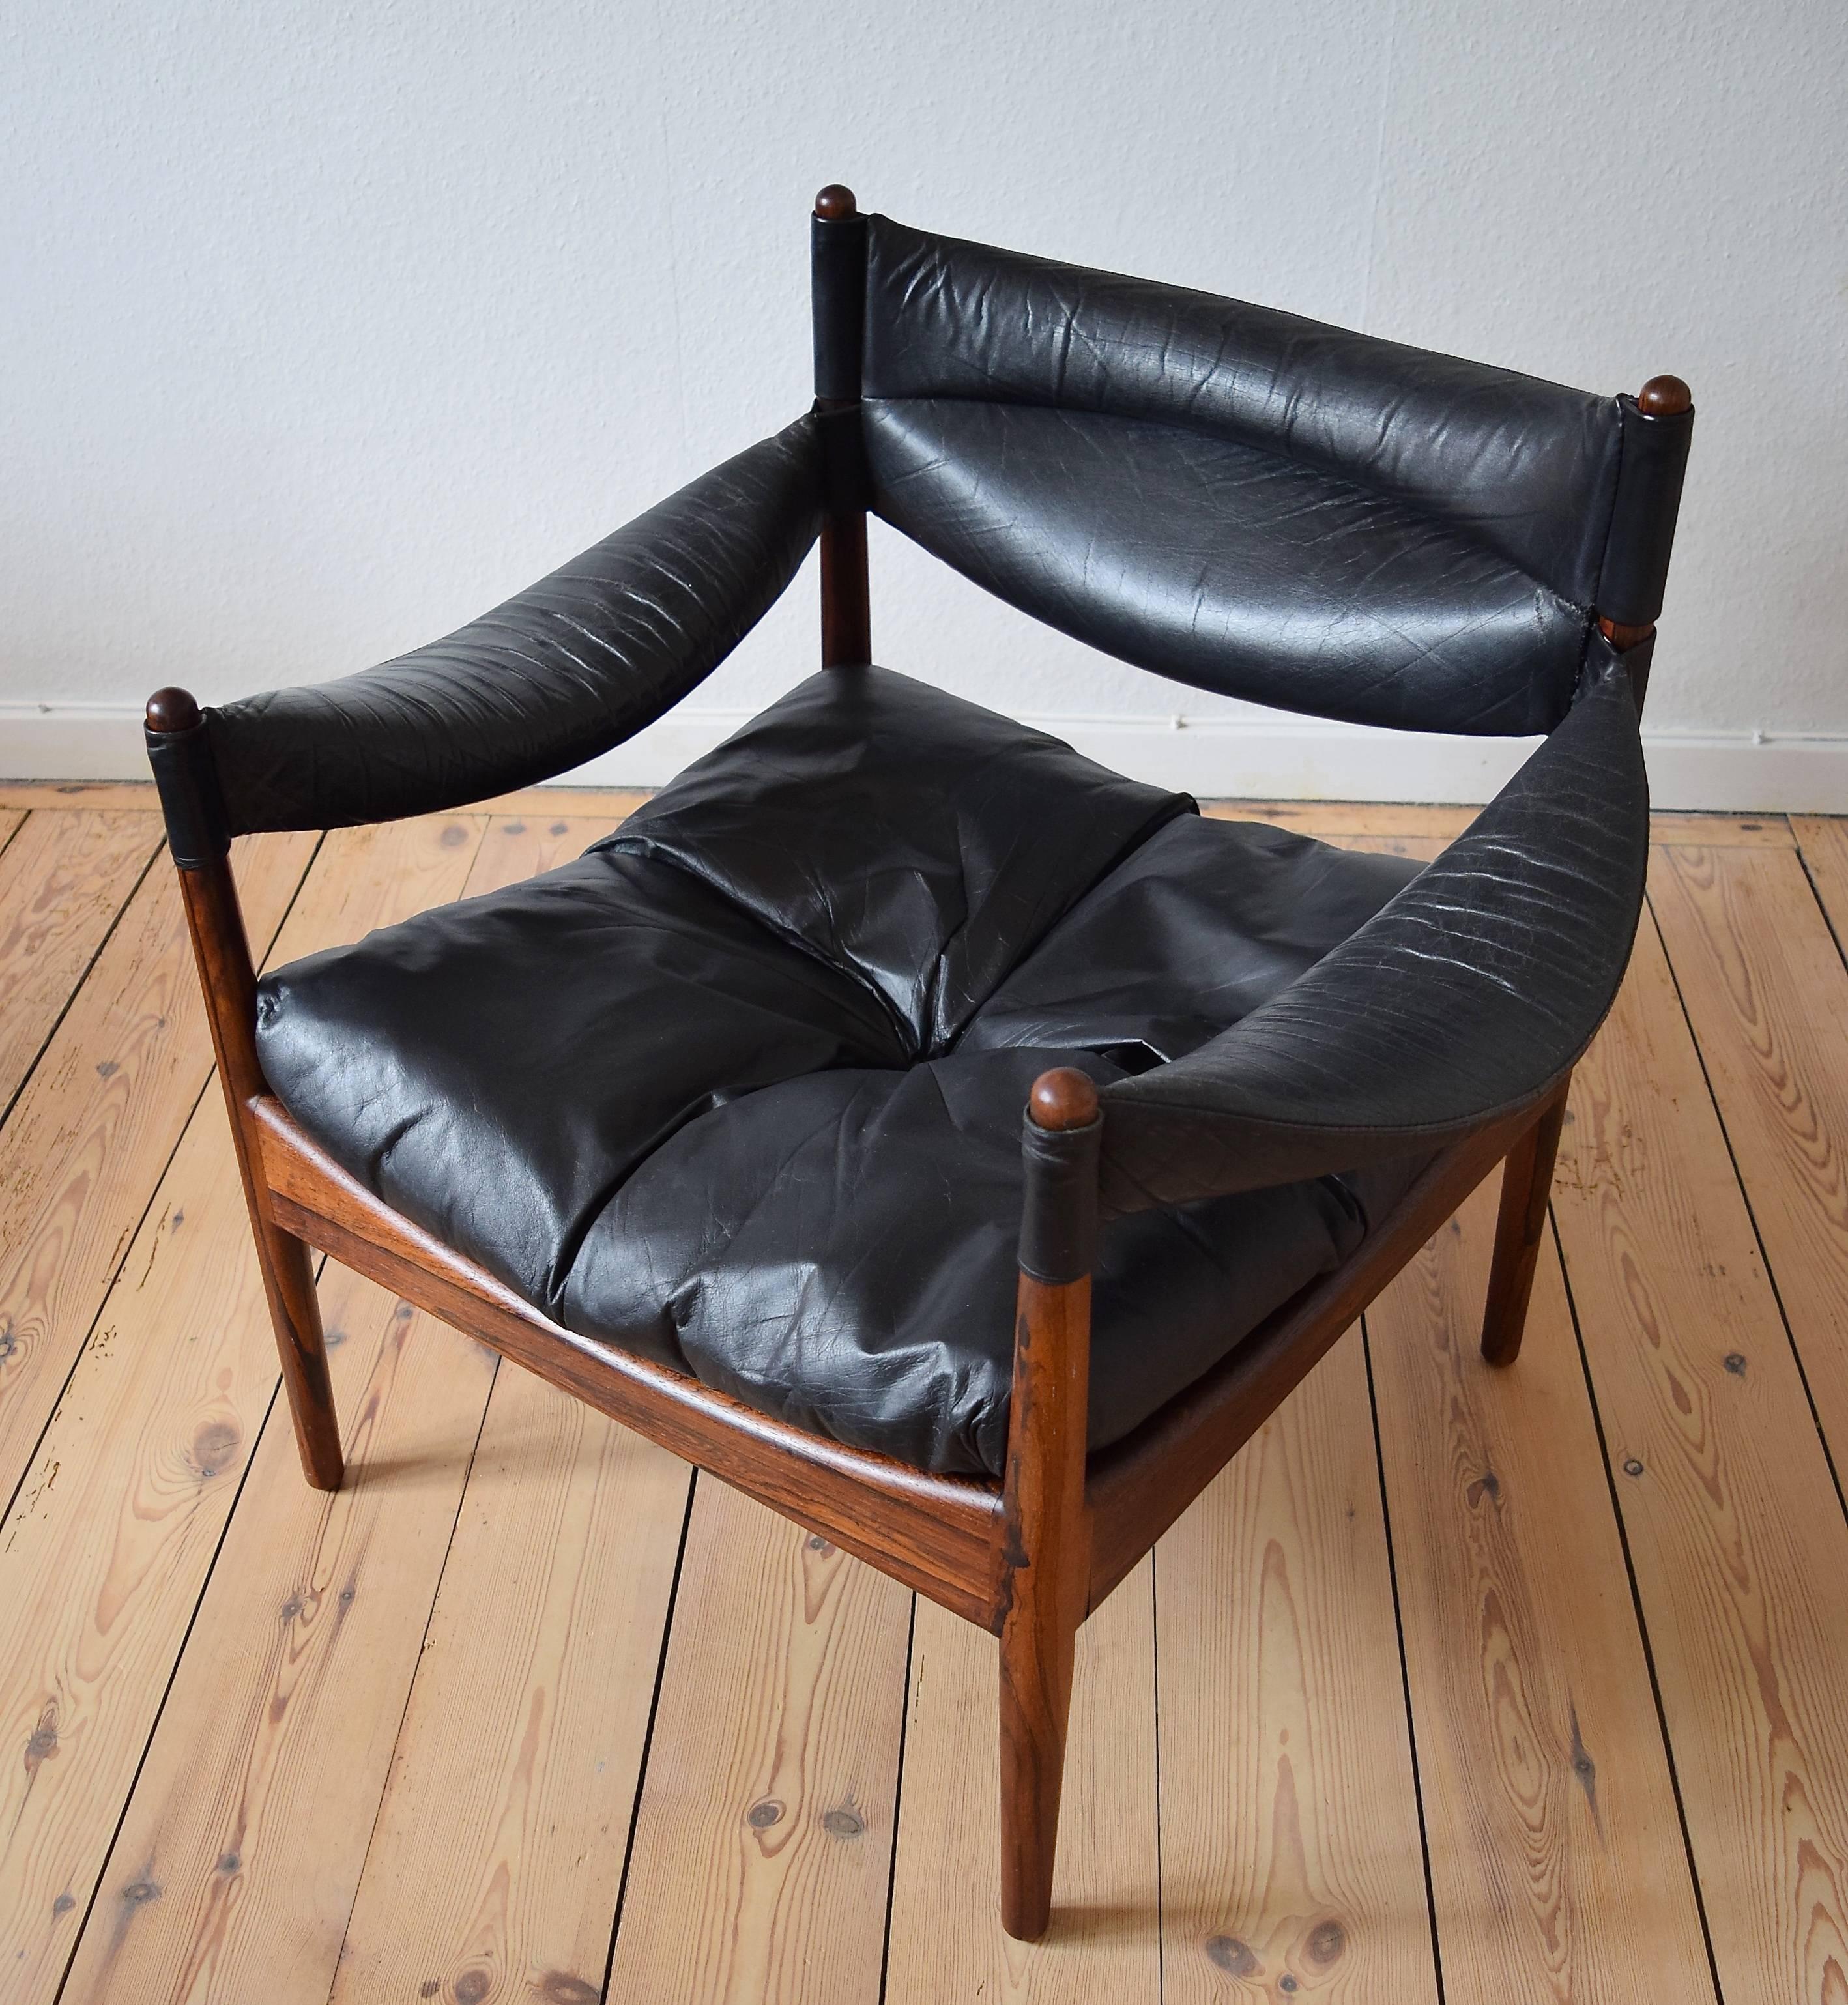 Leather and rosewood lounge chair designed by Kristian Vedel for Søren Willadsen, Denmark. This is Vedel's most popular design and came in slightly different variations. This is the low back easy chair. It is quite a departure from most of the other